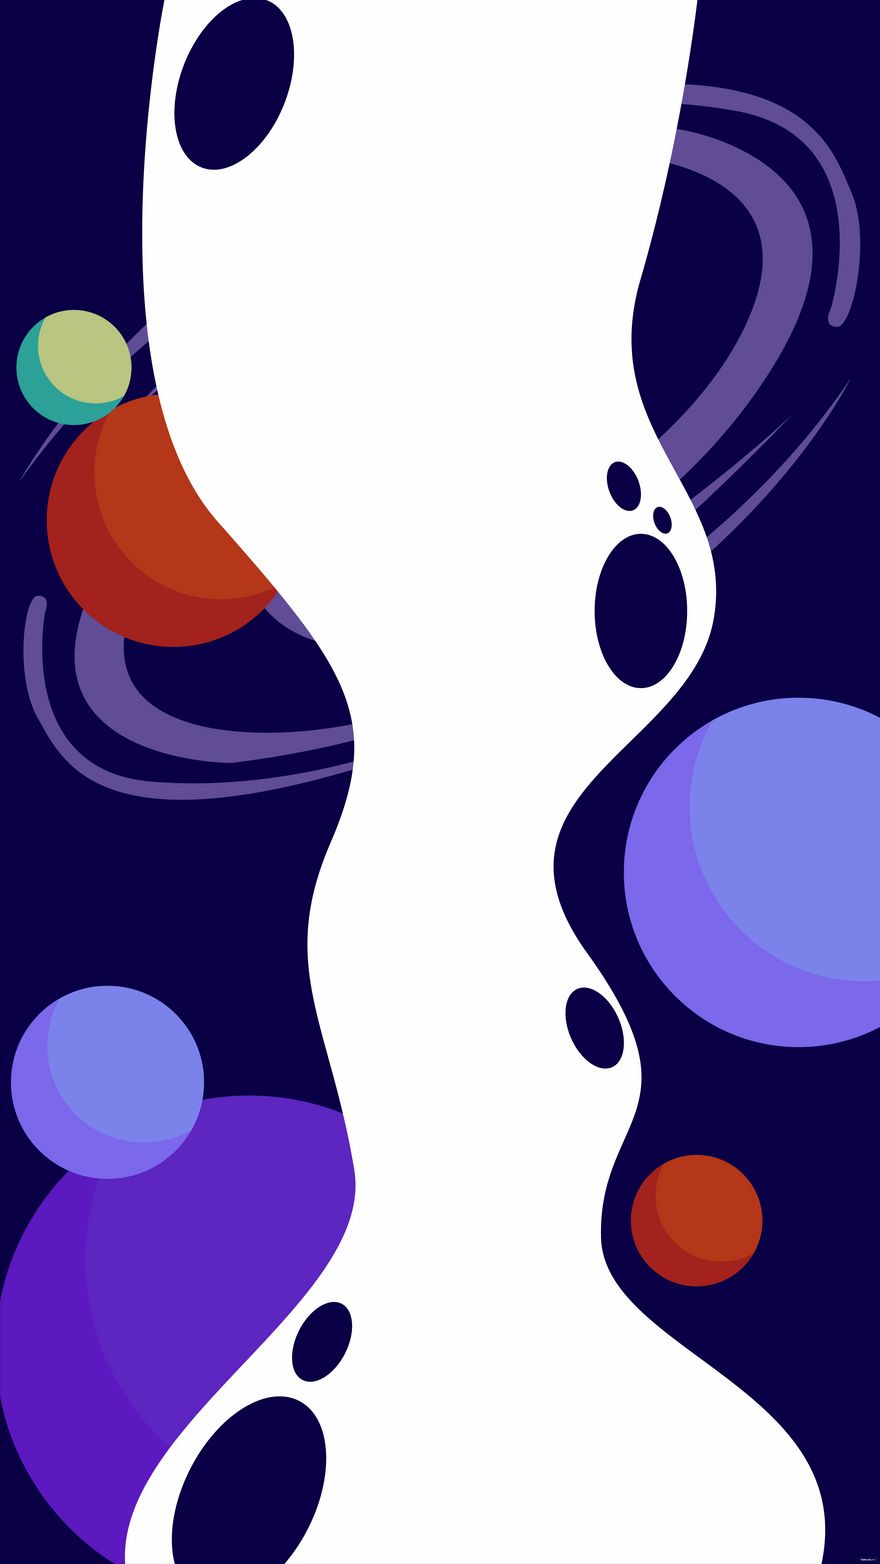 Galaxy Phone Background in Illustrator, EPS, SVG